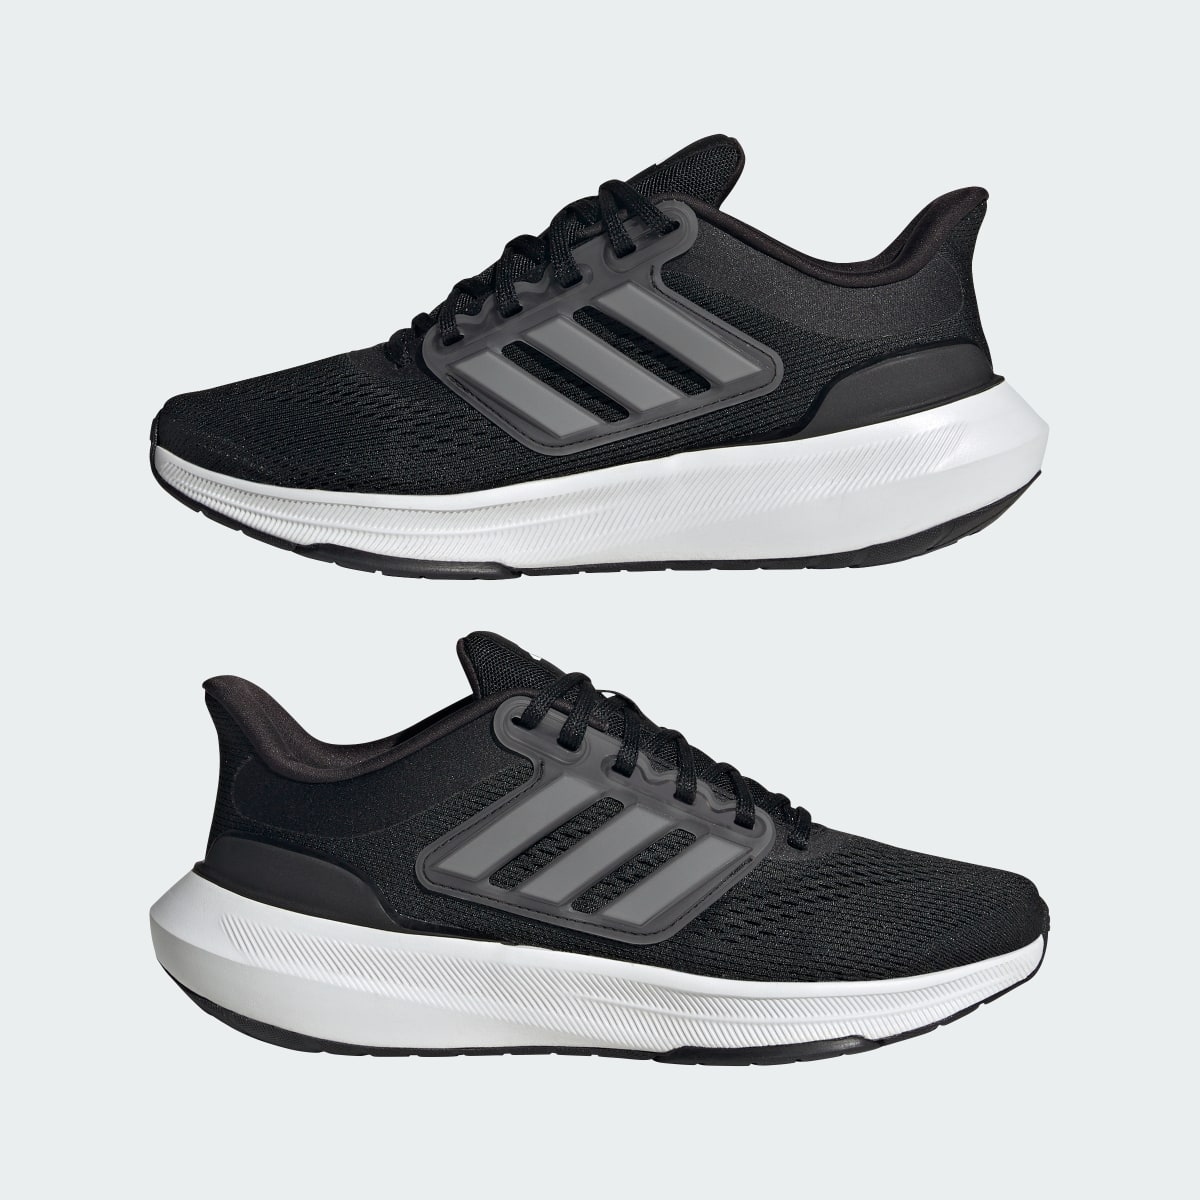 Adidas Ultrabounce Wide Shoes. 8